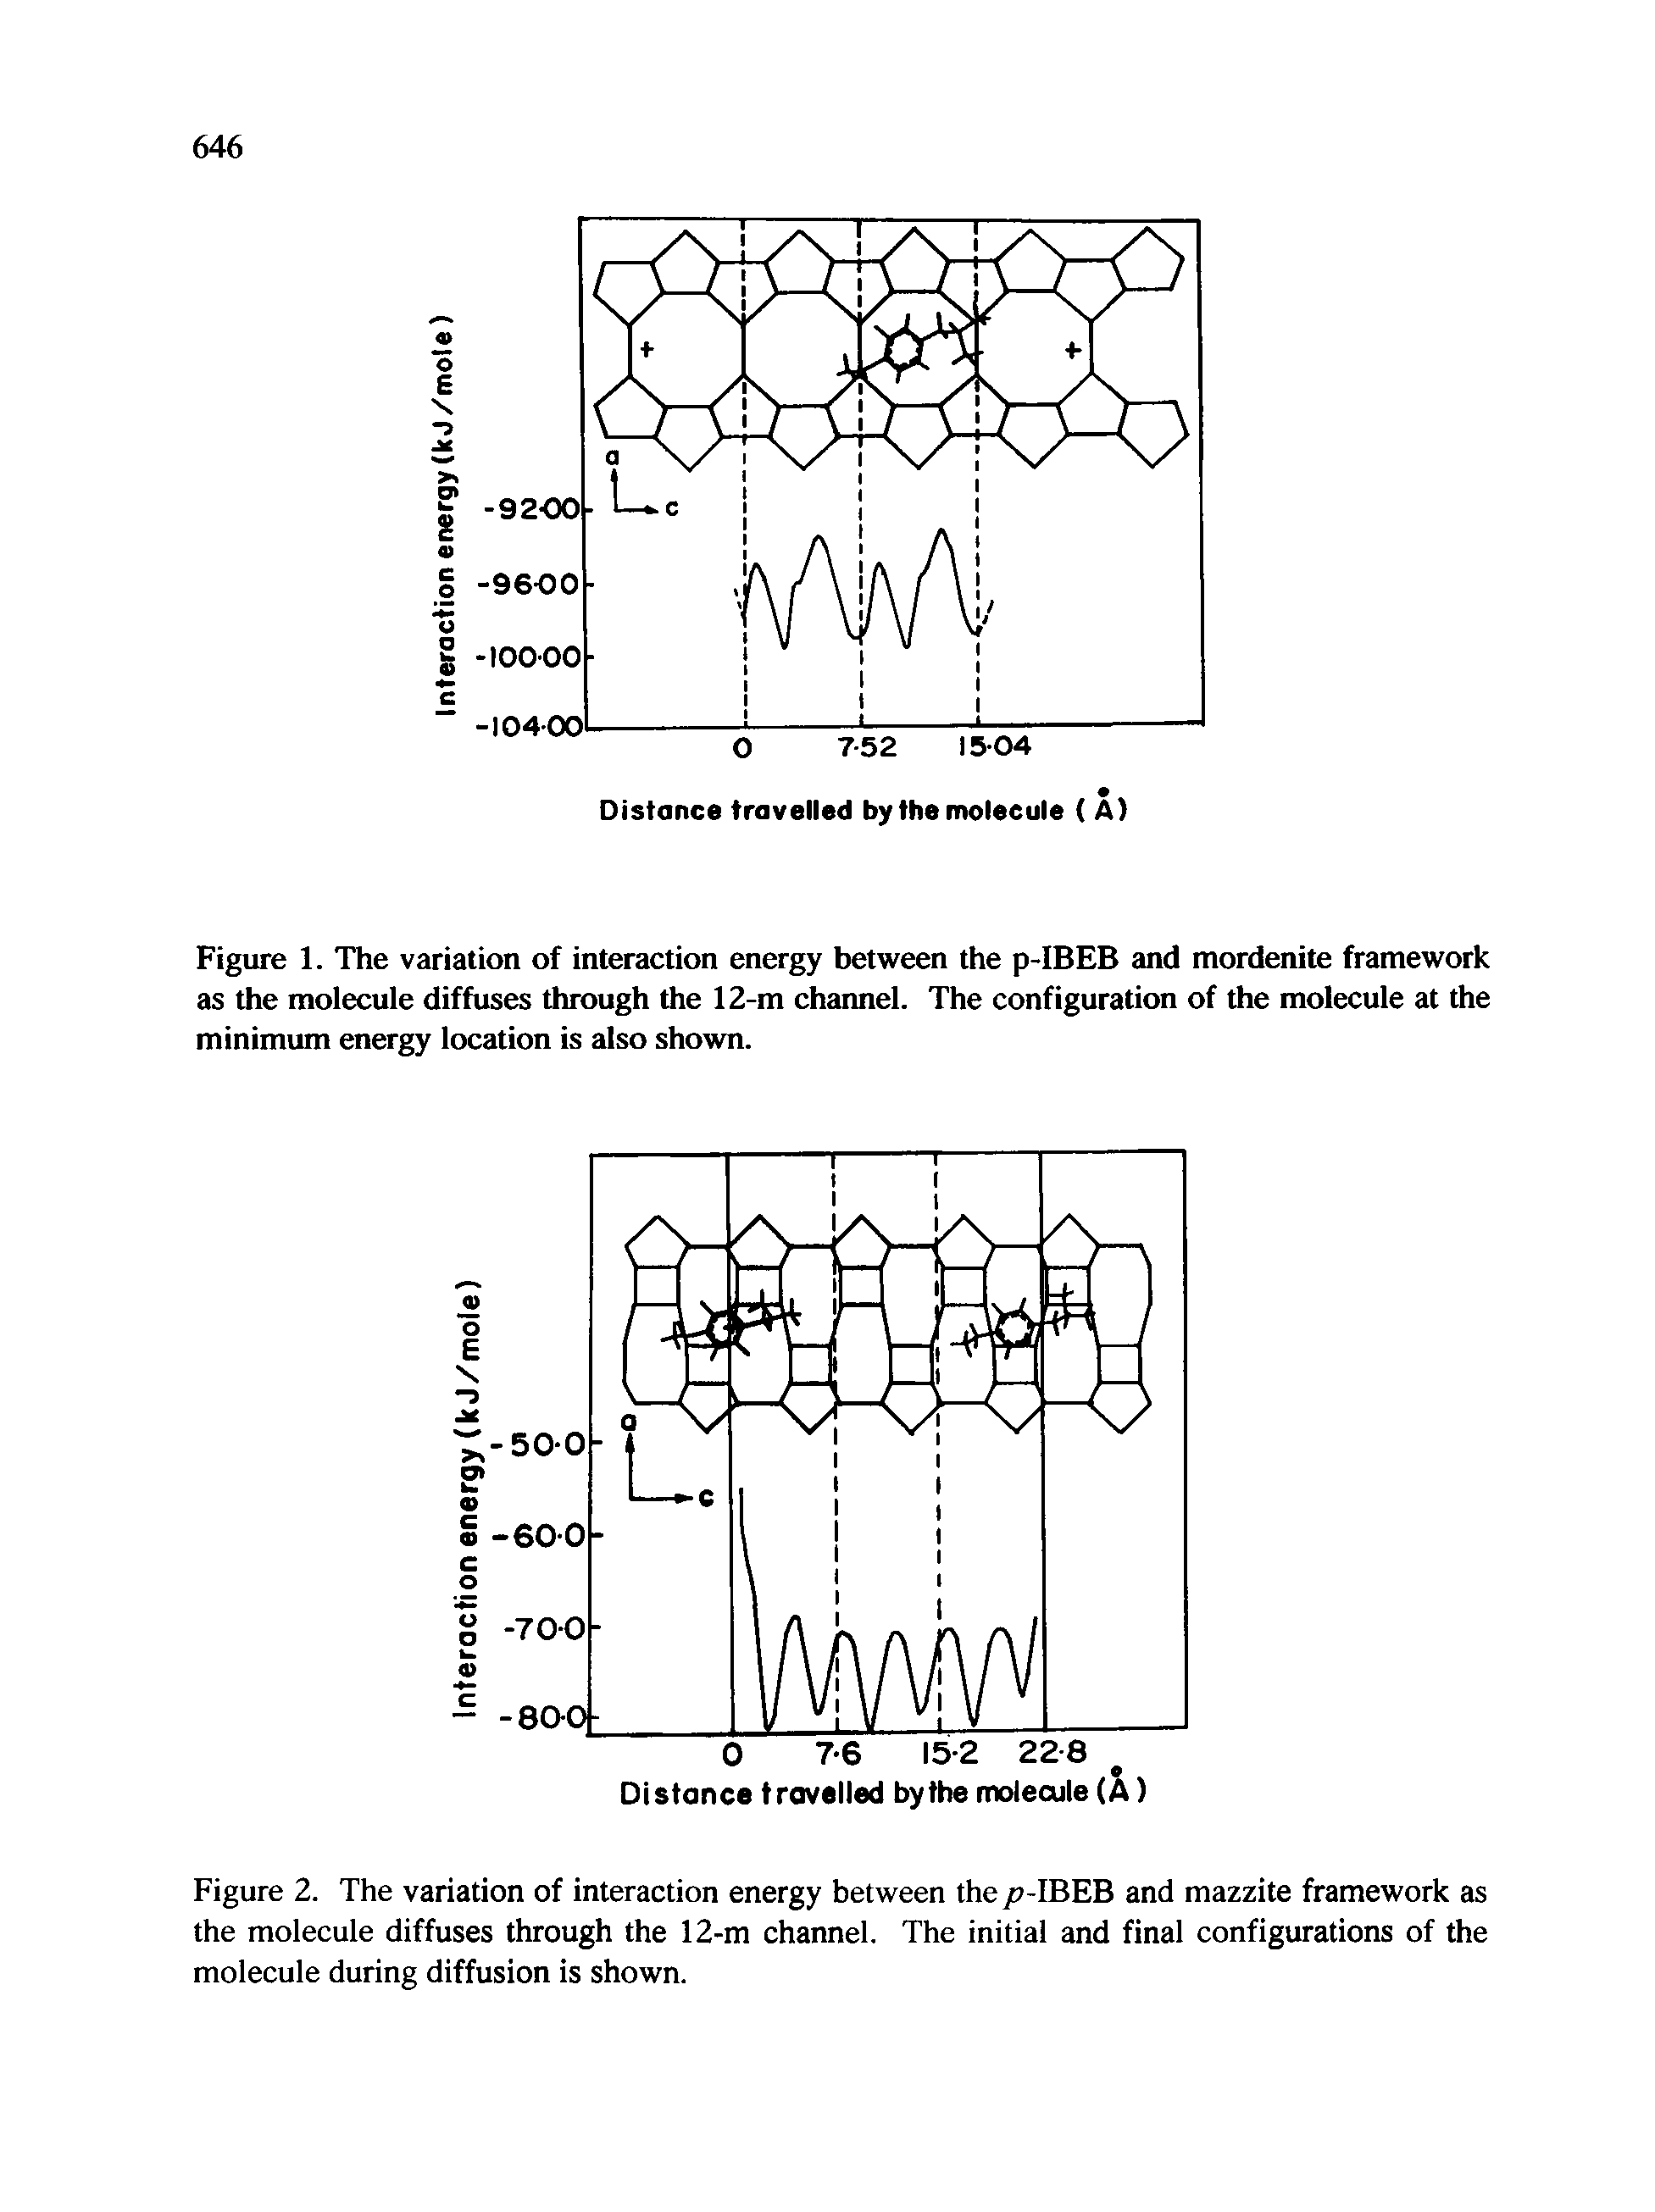 Figure 1. The variation of interaction energy between the p-IBEB and mordenite framework as the molecule diffuses through the 12-m channel. The configuration of the molecule at the minimum energy location is also shown.